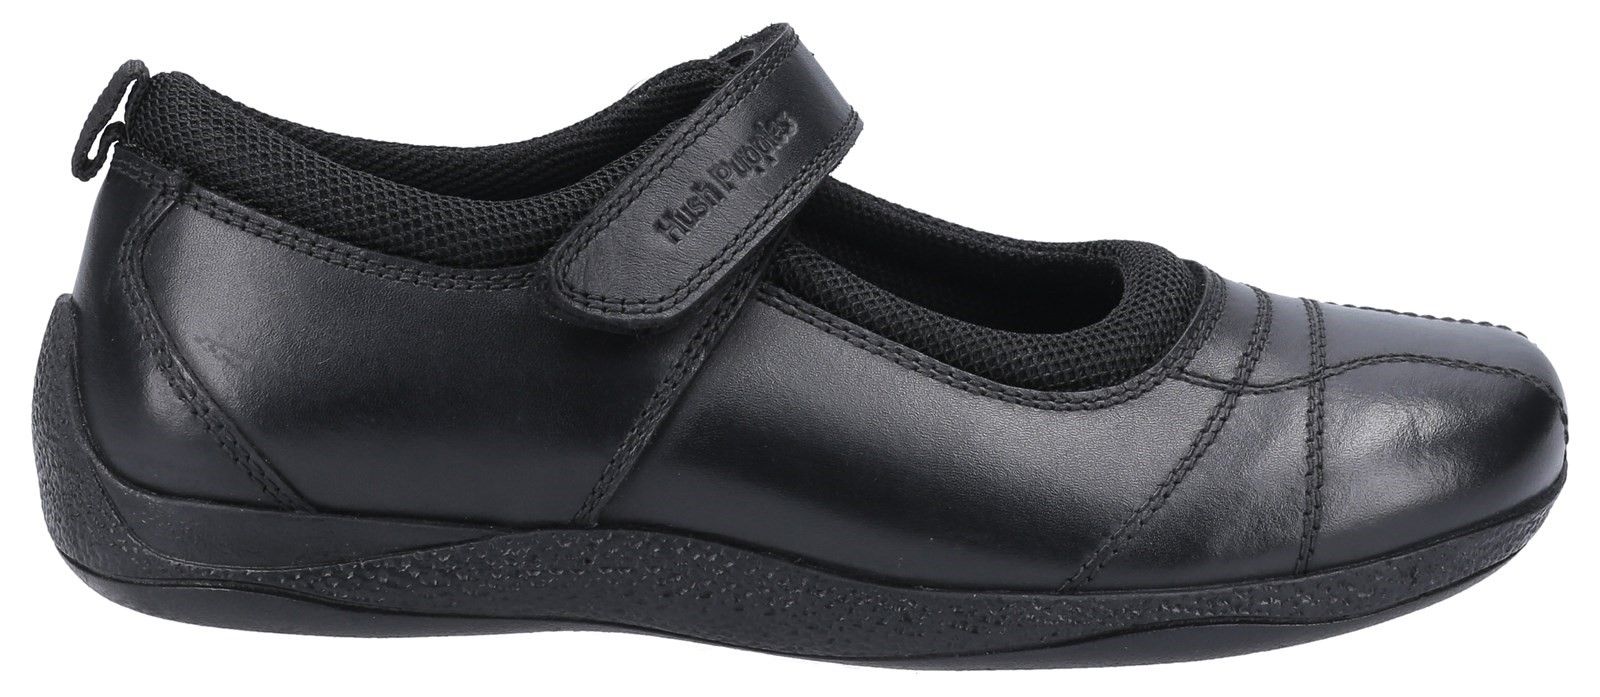 Clara is a single fit classic Mary jane style with a leather upper and touch-fastening strap for ease and adjustable fit. It features a padded topline/collar and a memory foam sock for all day comfort. It also has a Micro-Fresh sock and lining.Leather Upper. 
Memory Foam Insole. 
Micro-Fresh Lining.